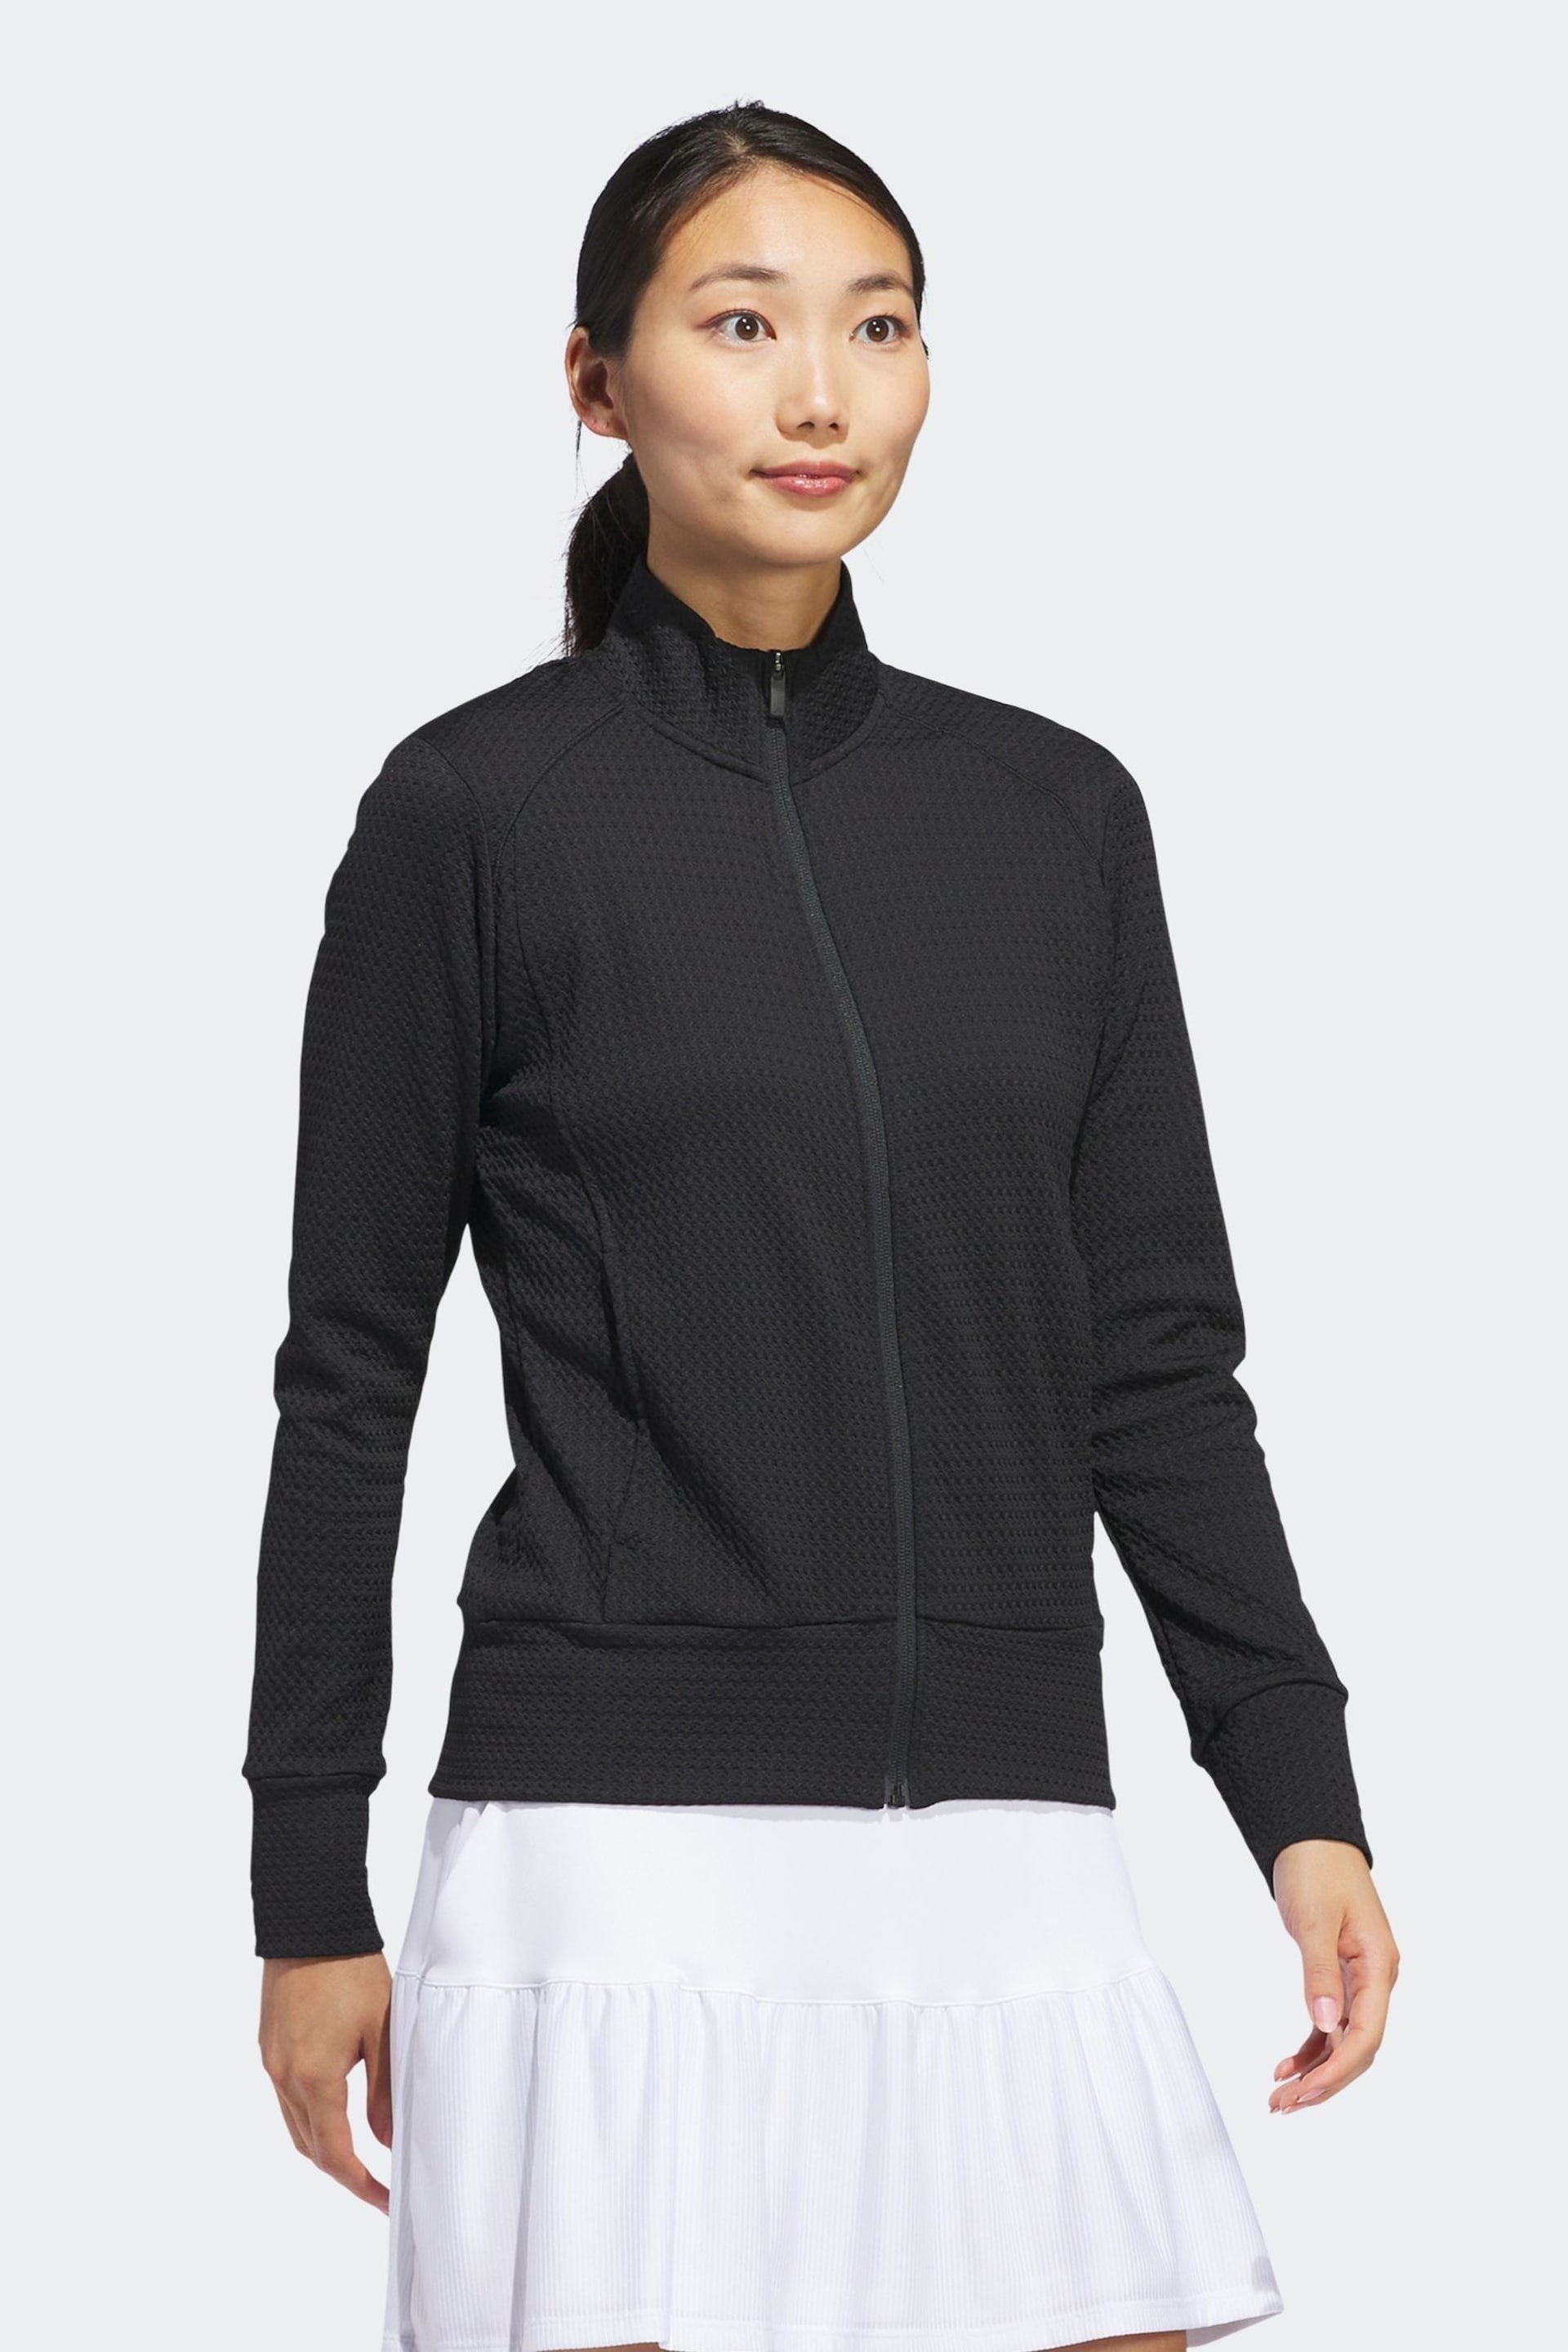 adidas Golf Womens Ultimate365 Textured Jacket - Image 3 of 7